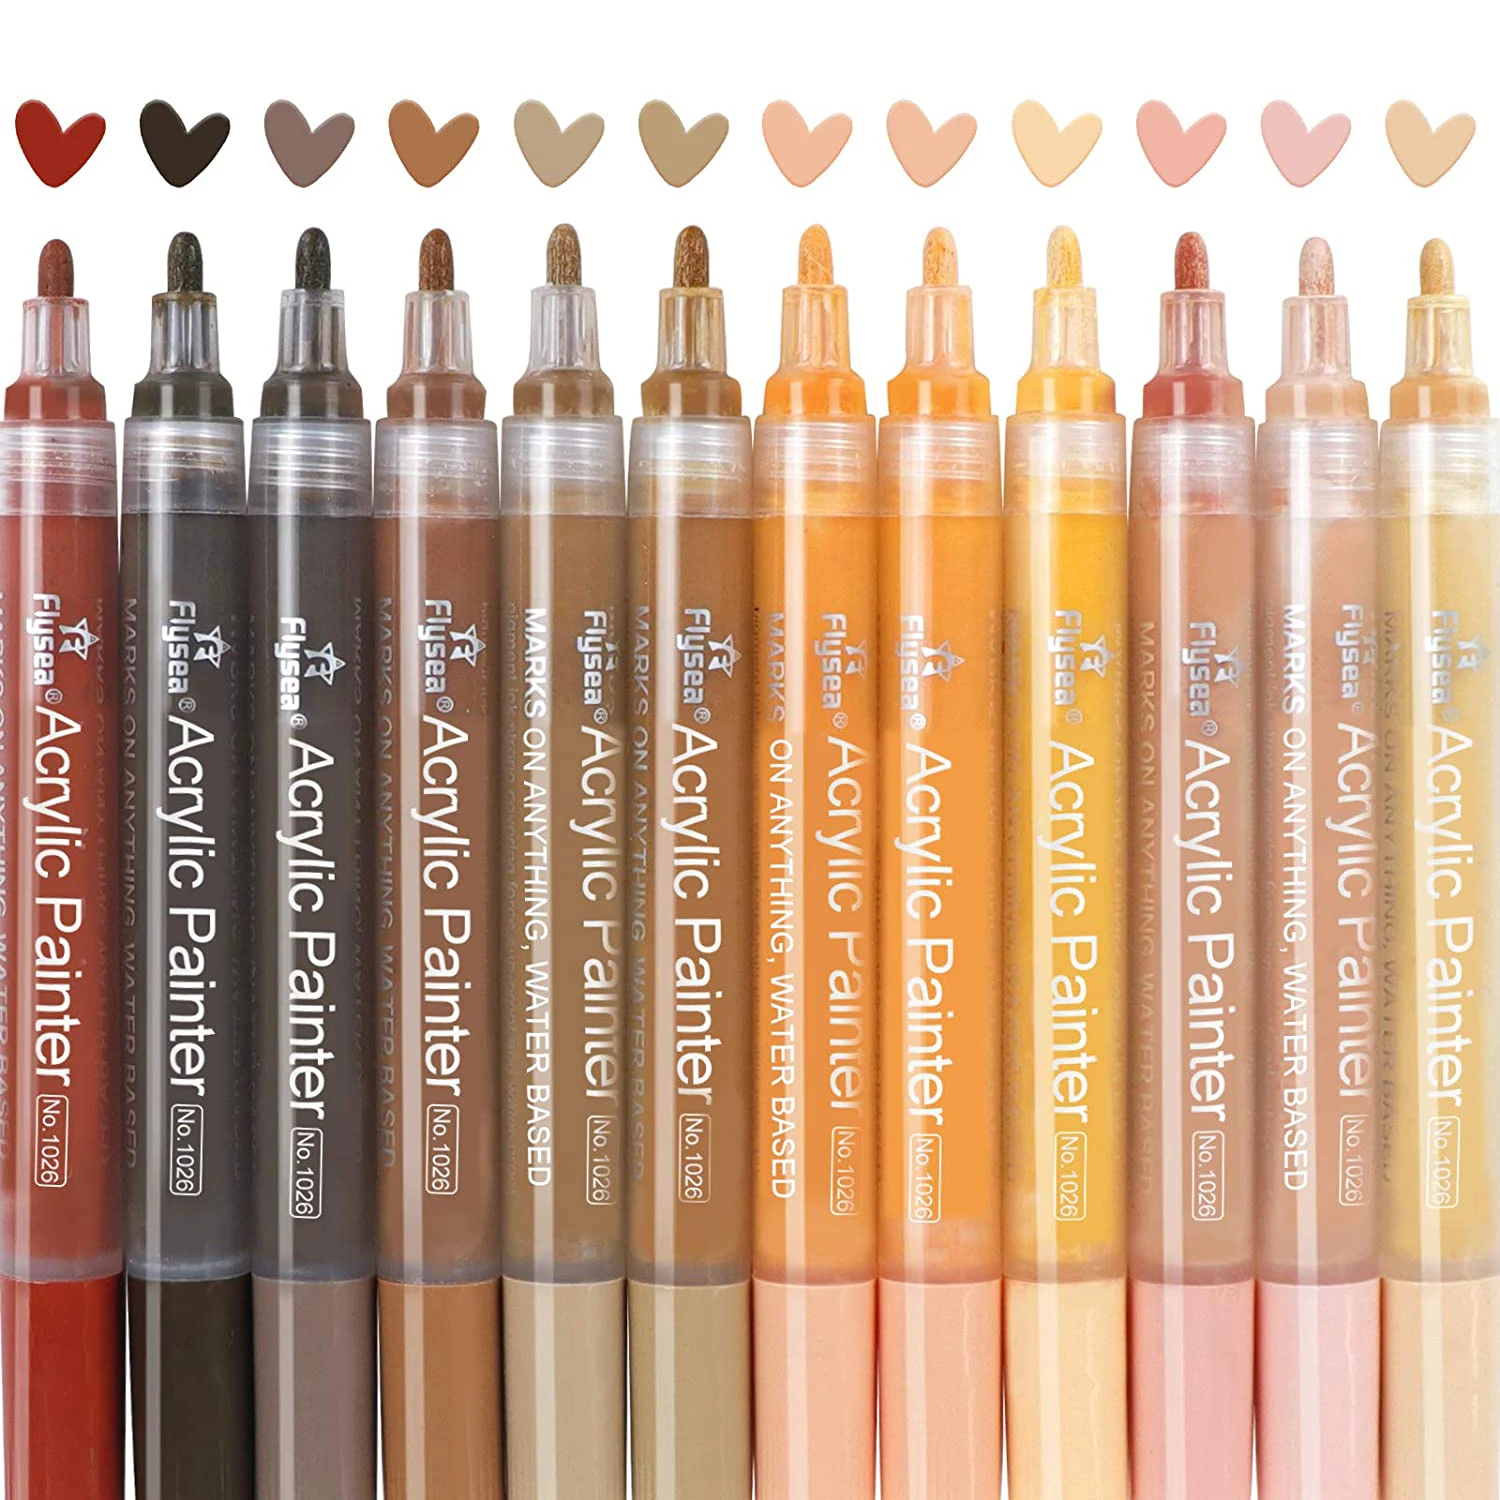 

12 Colors Skin Tones Art Markers 0.7mm Extra Fine Tip Acrylic Paint Pens Sketch Portrait Manga Drawing Illustration Sketching